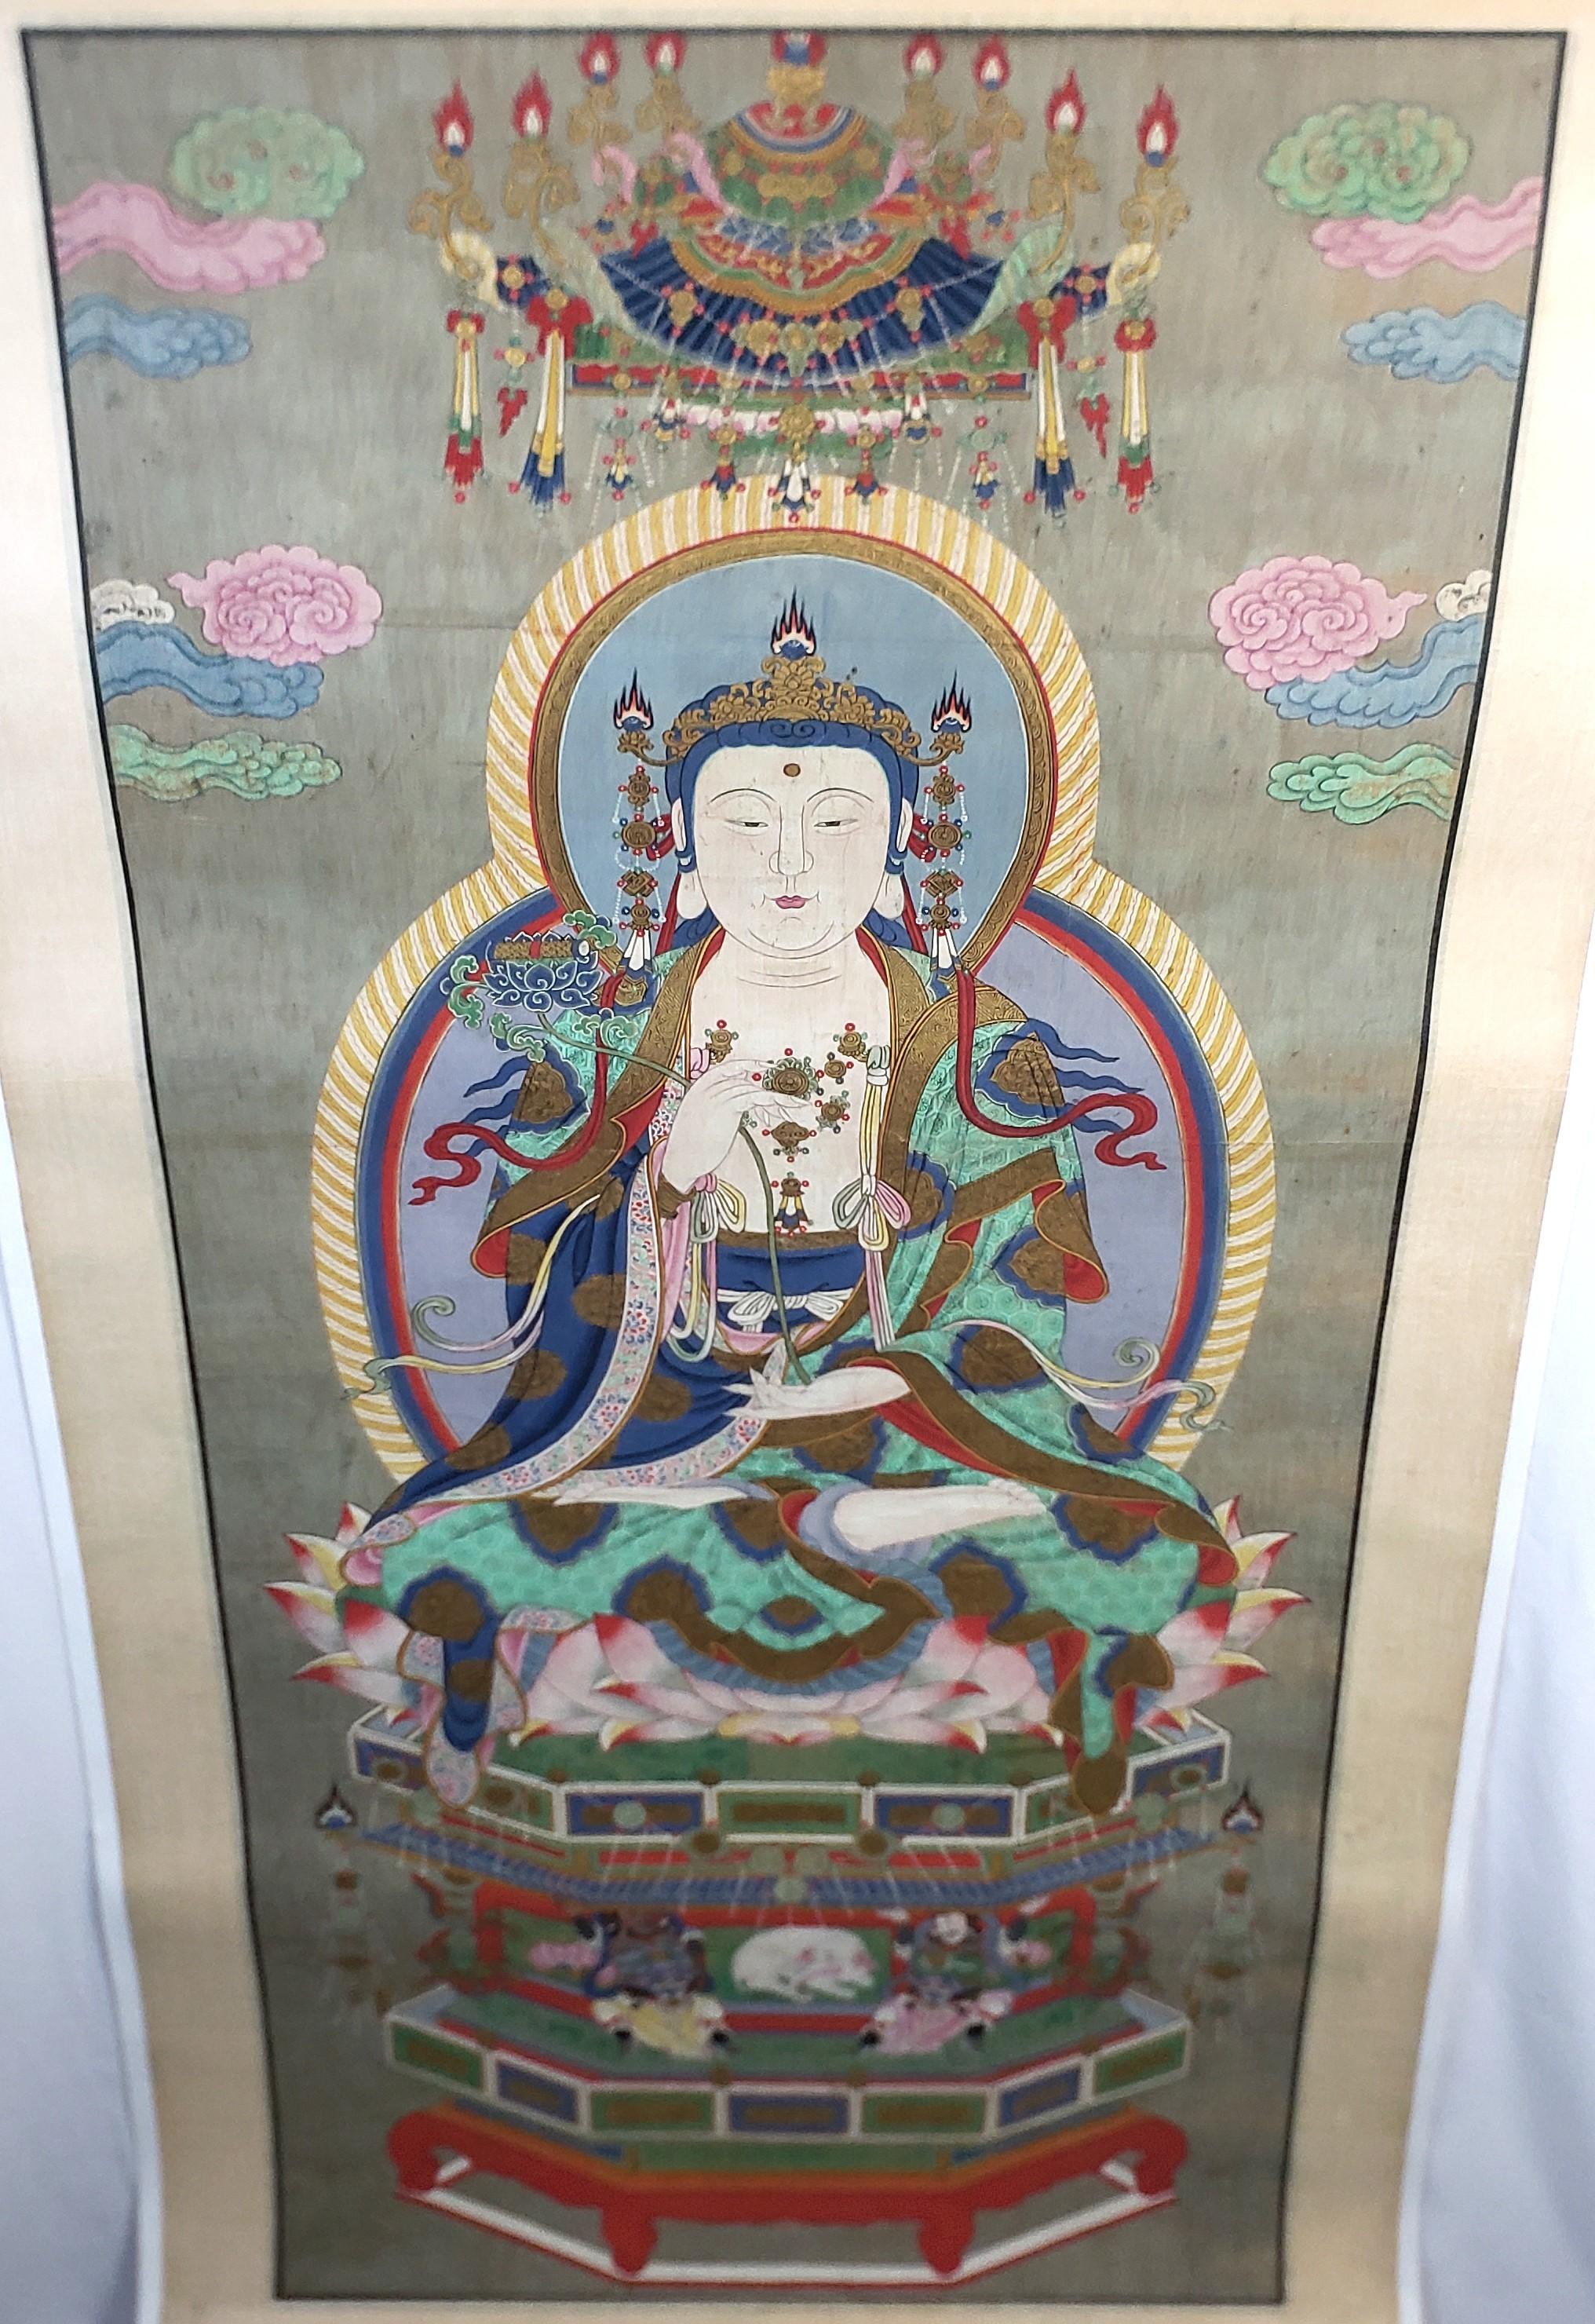 Hand-Crafted Large Antique Chinese Qing Dynasty Hand-Painted Buddhist Scroll on Silk For Sale